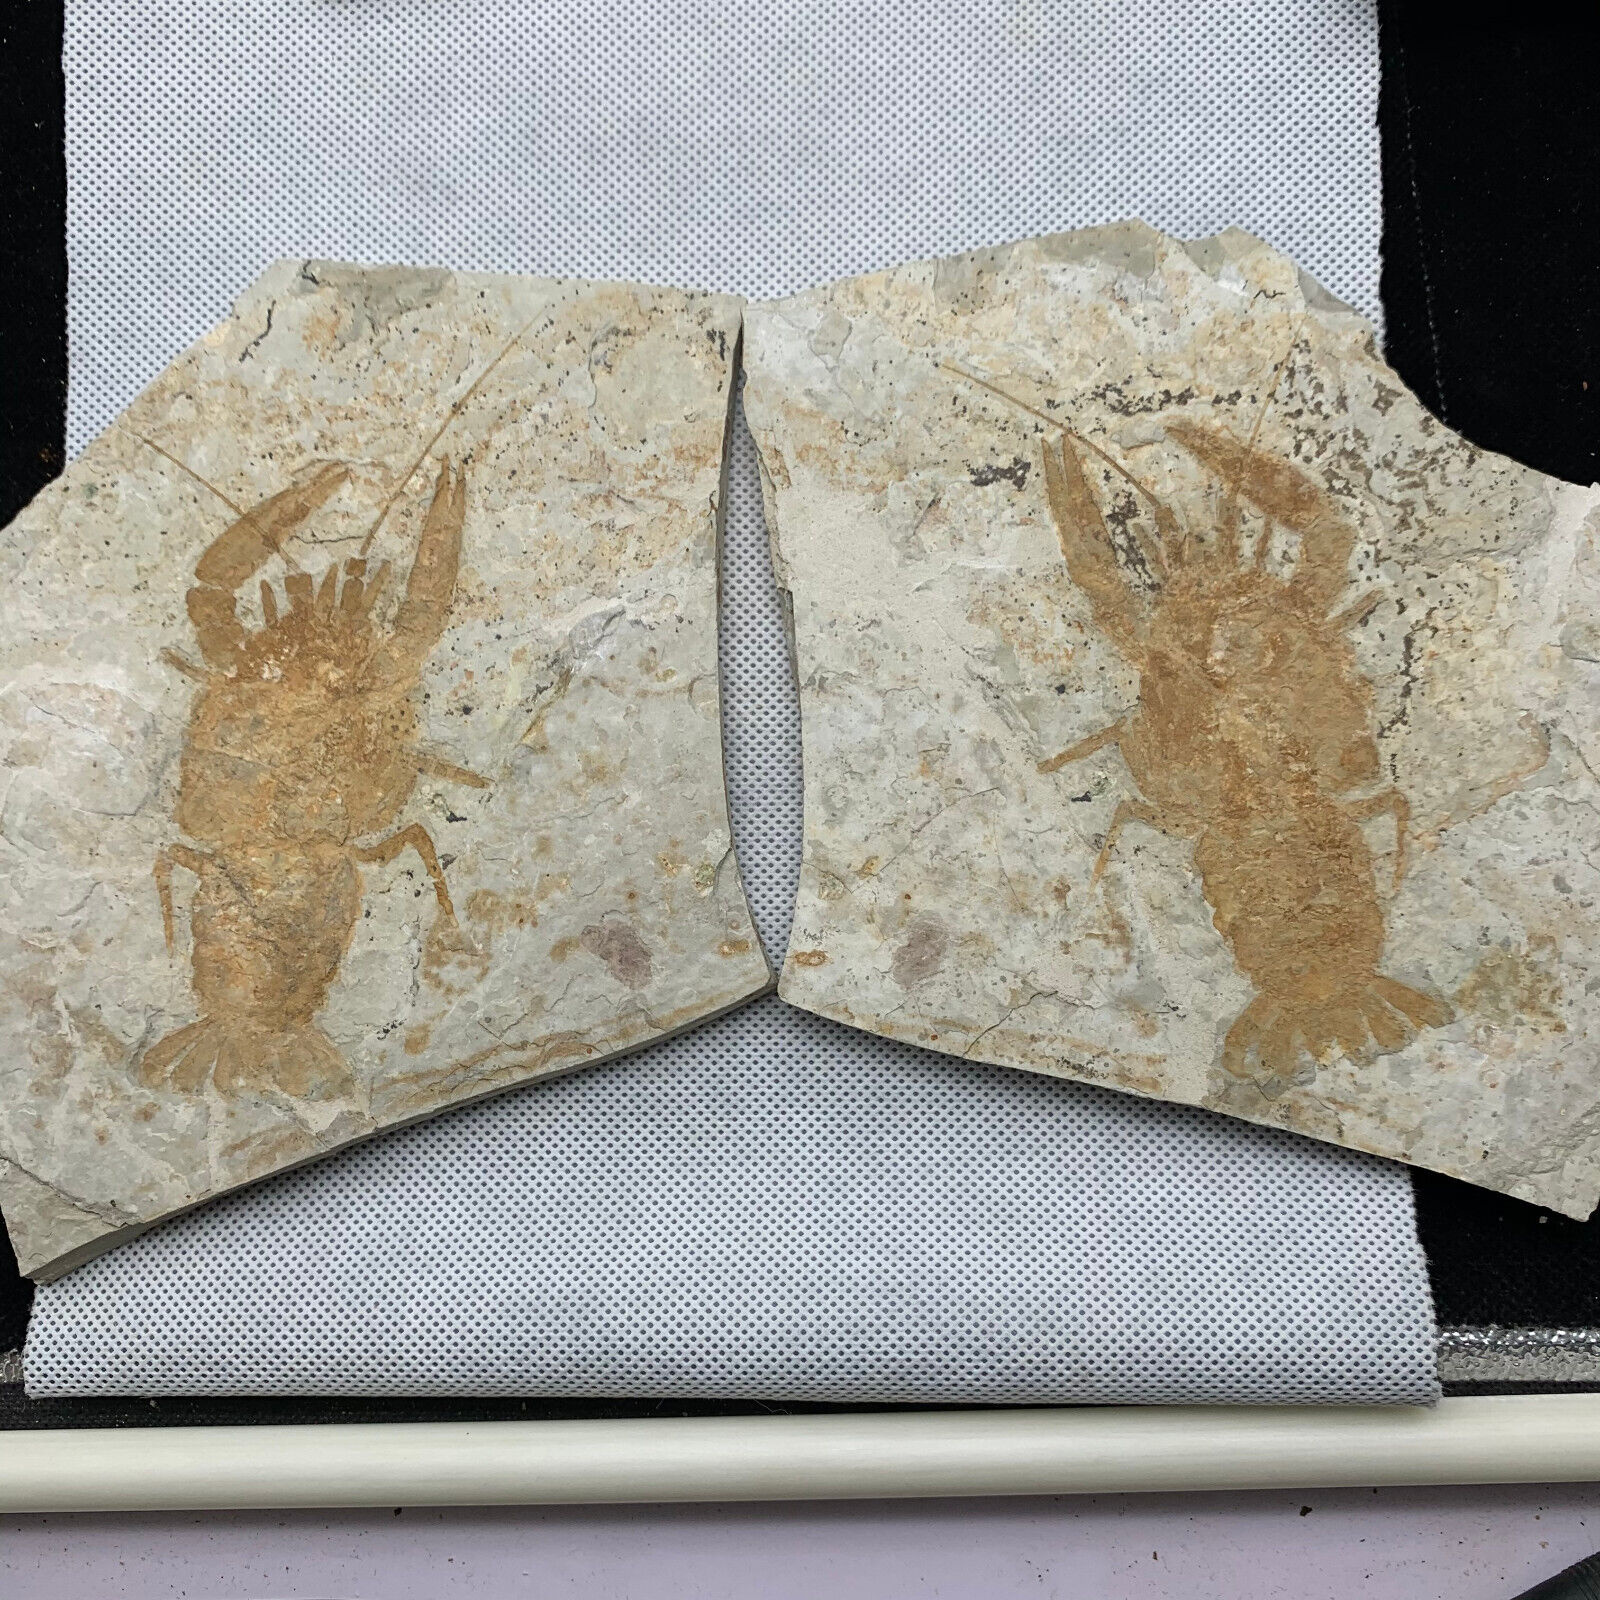 A pair of exquisite Chinese lobster fossils in the Cretaceous period